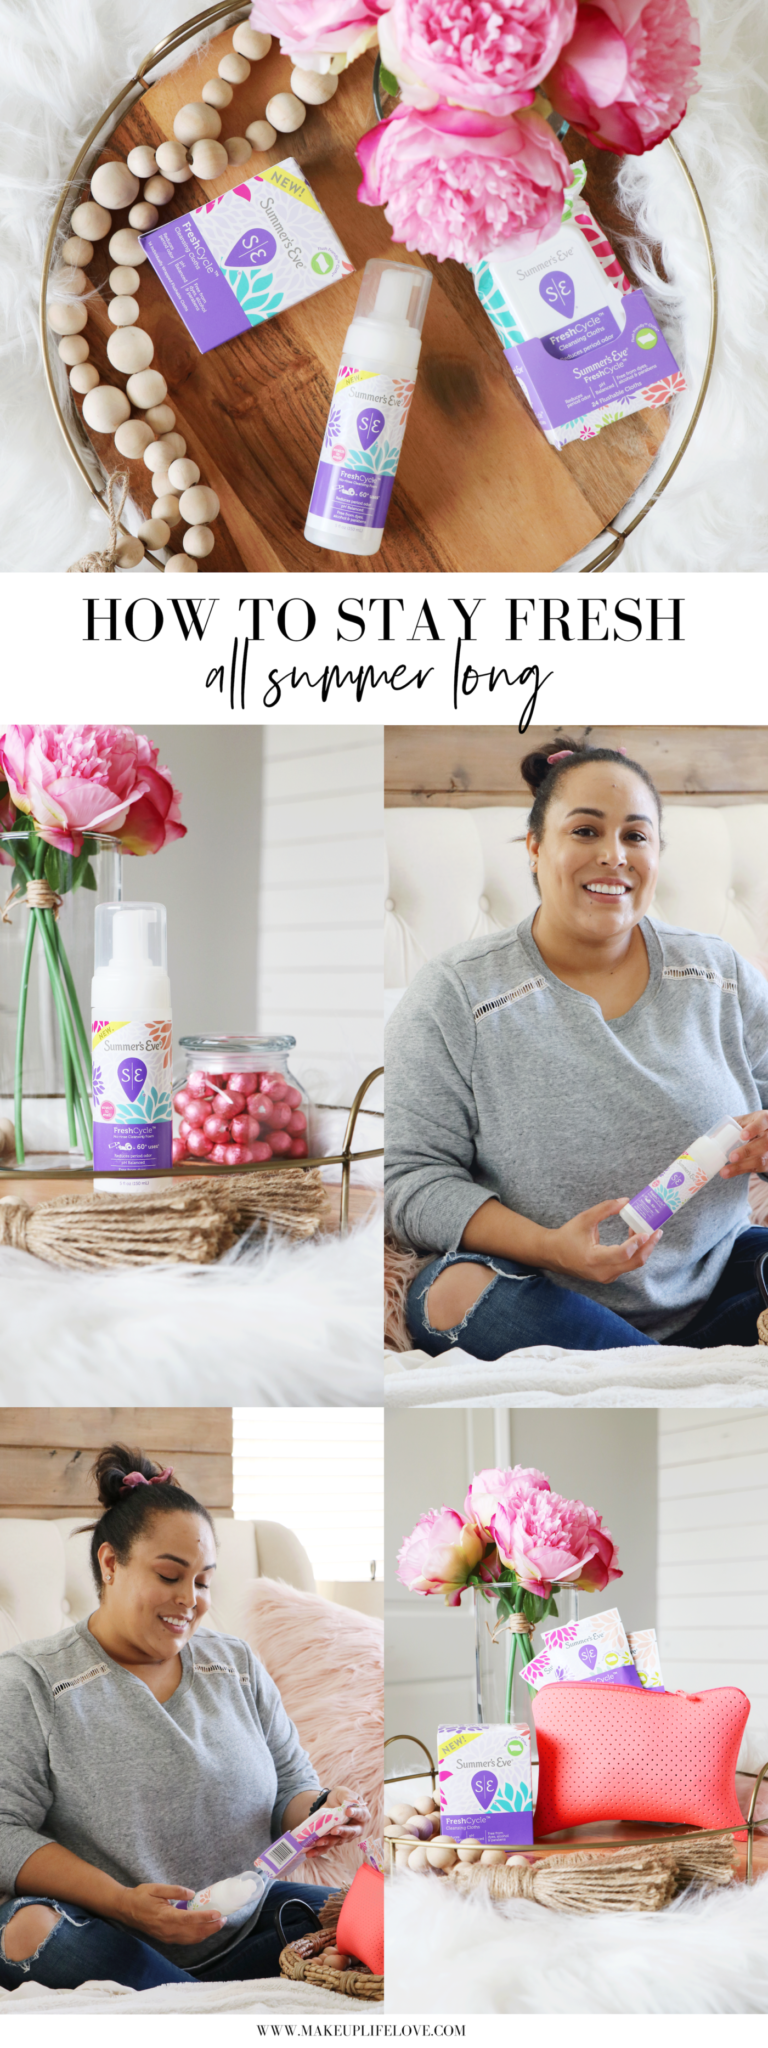 Join the conversation as Los Angeles Blogger Makeup Life and Love chats all things on how to stay fresh during that time of the month here! #ad #SEFreshAF #FreshCycle